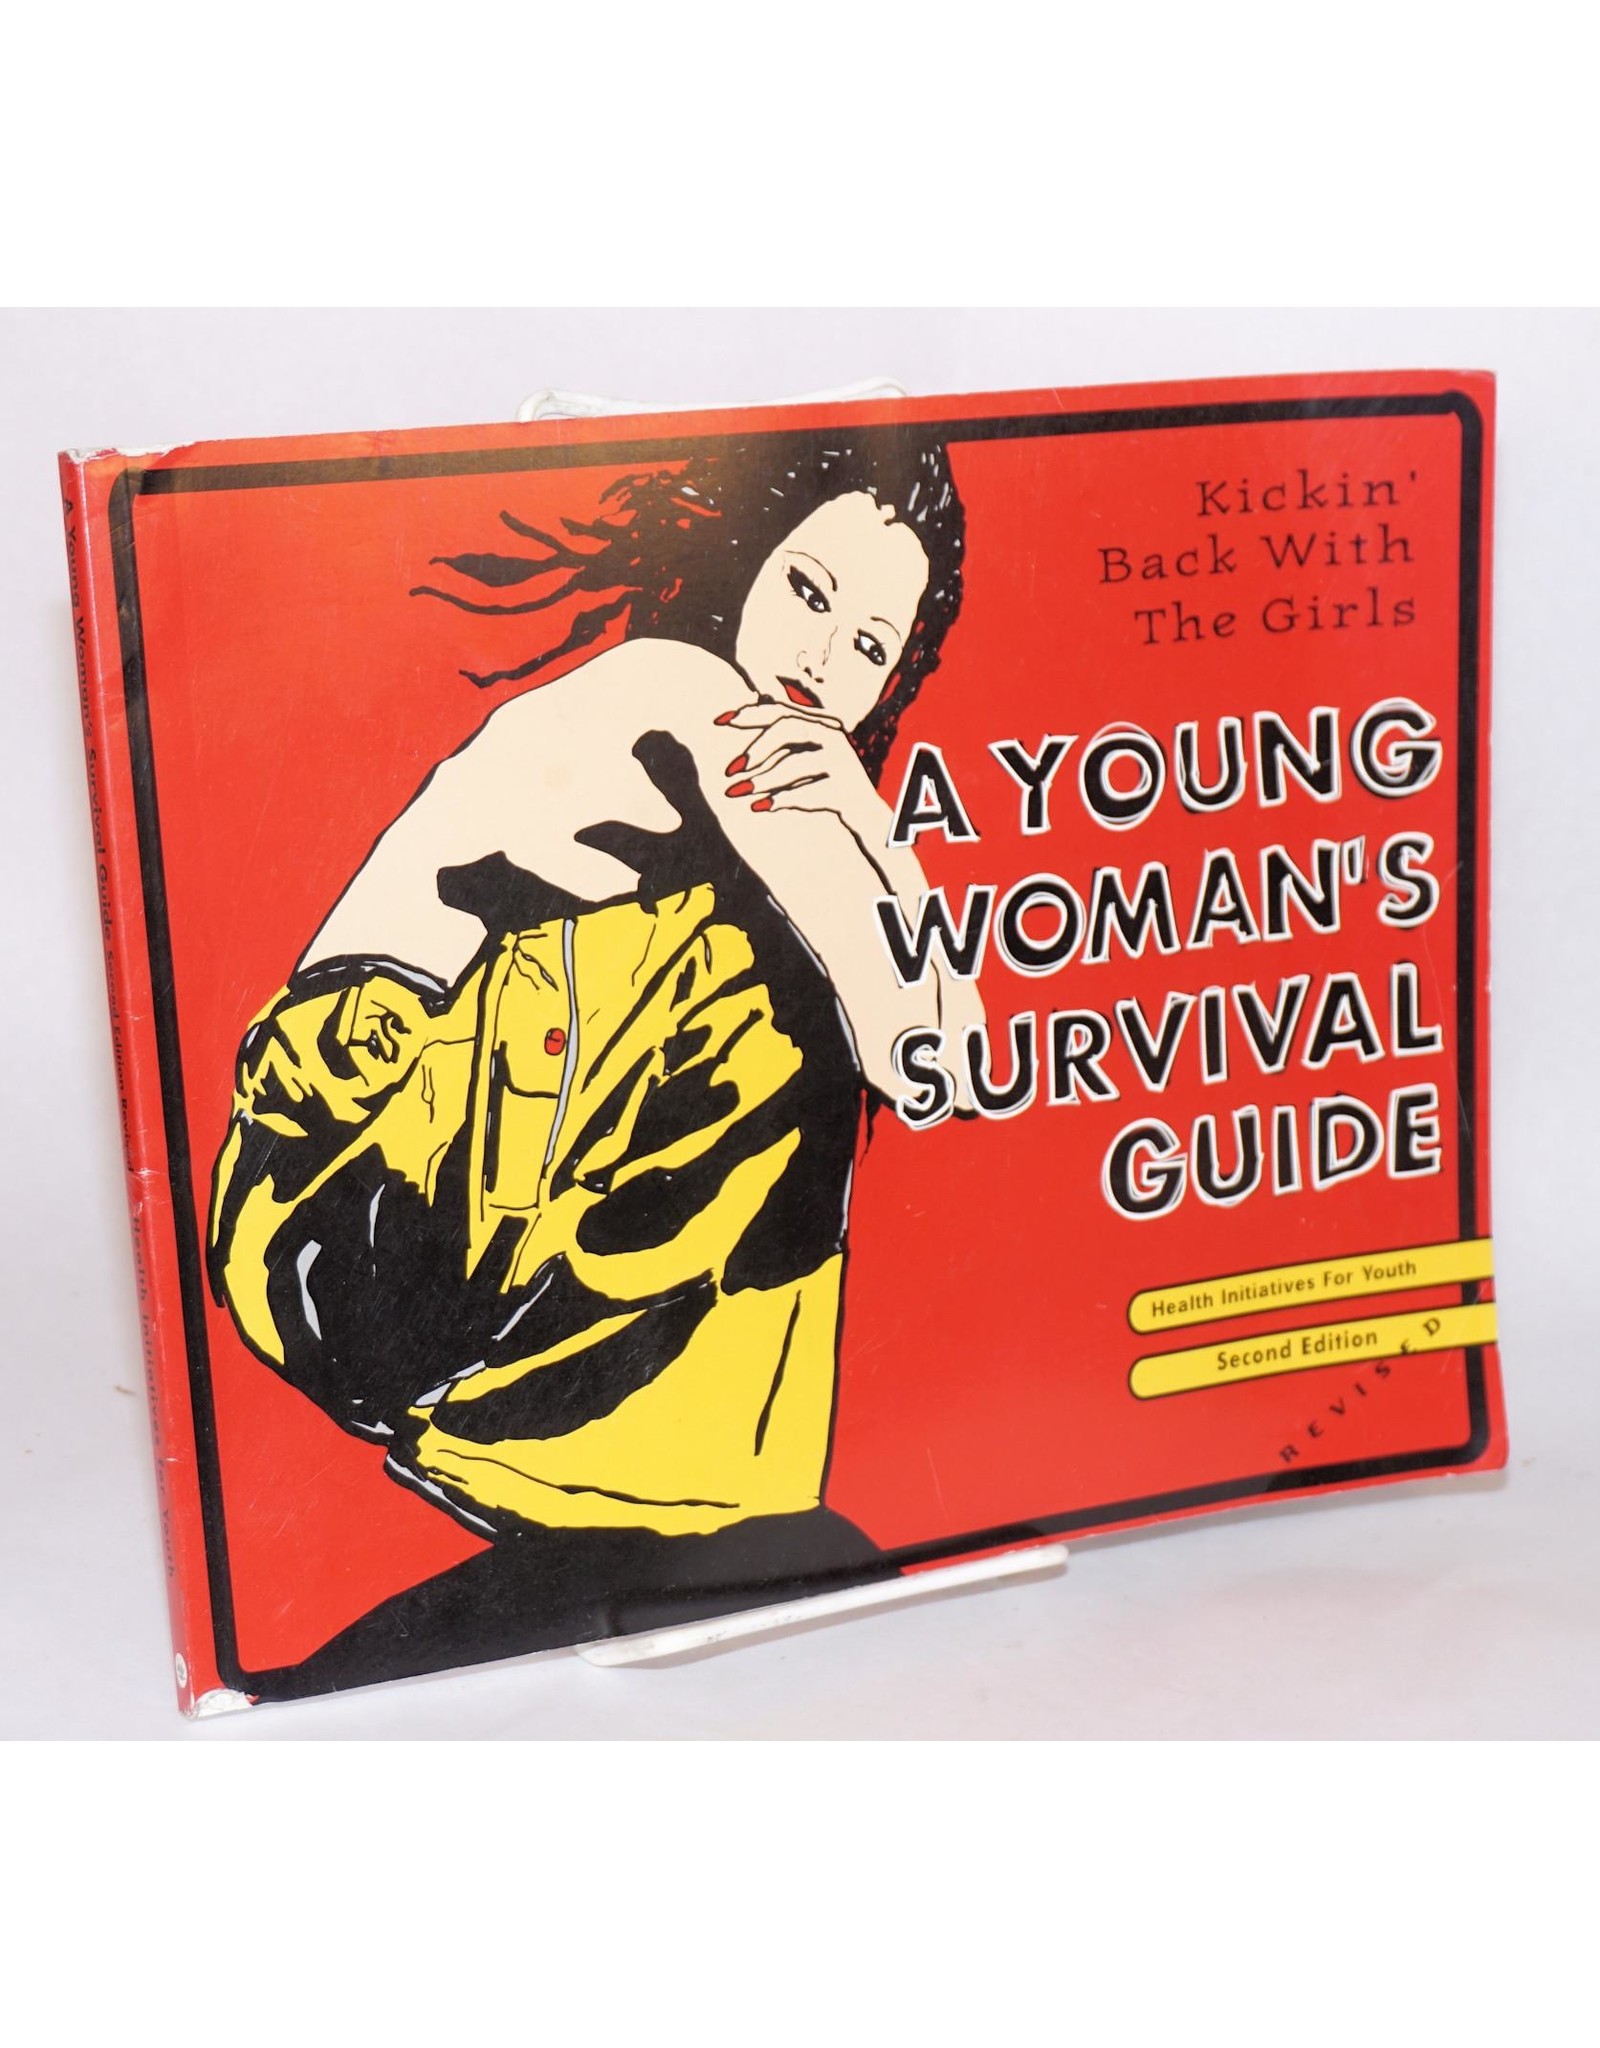 Literature A Young Woman's Survival Guide